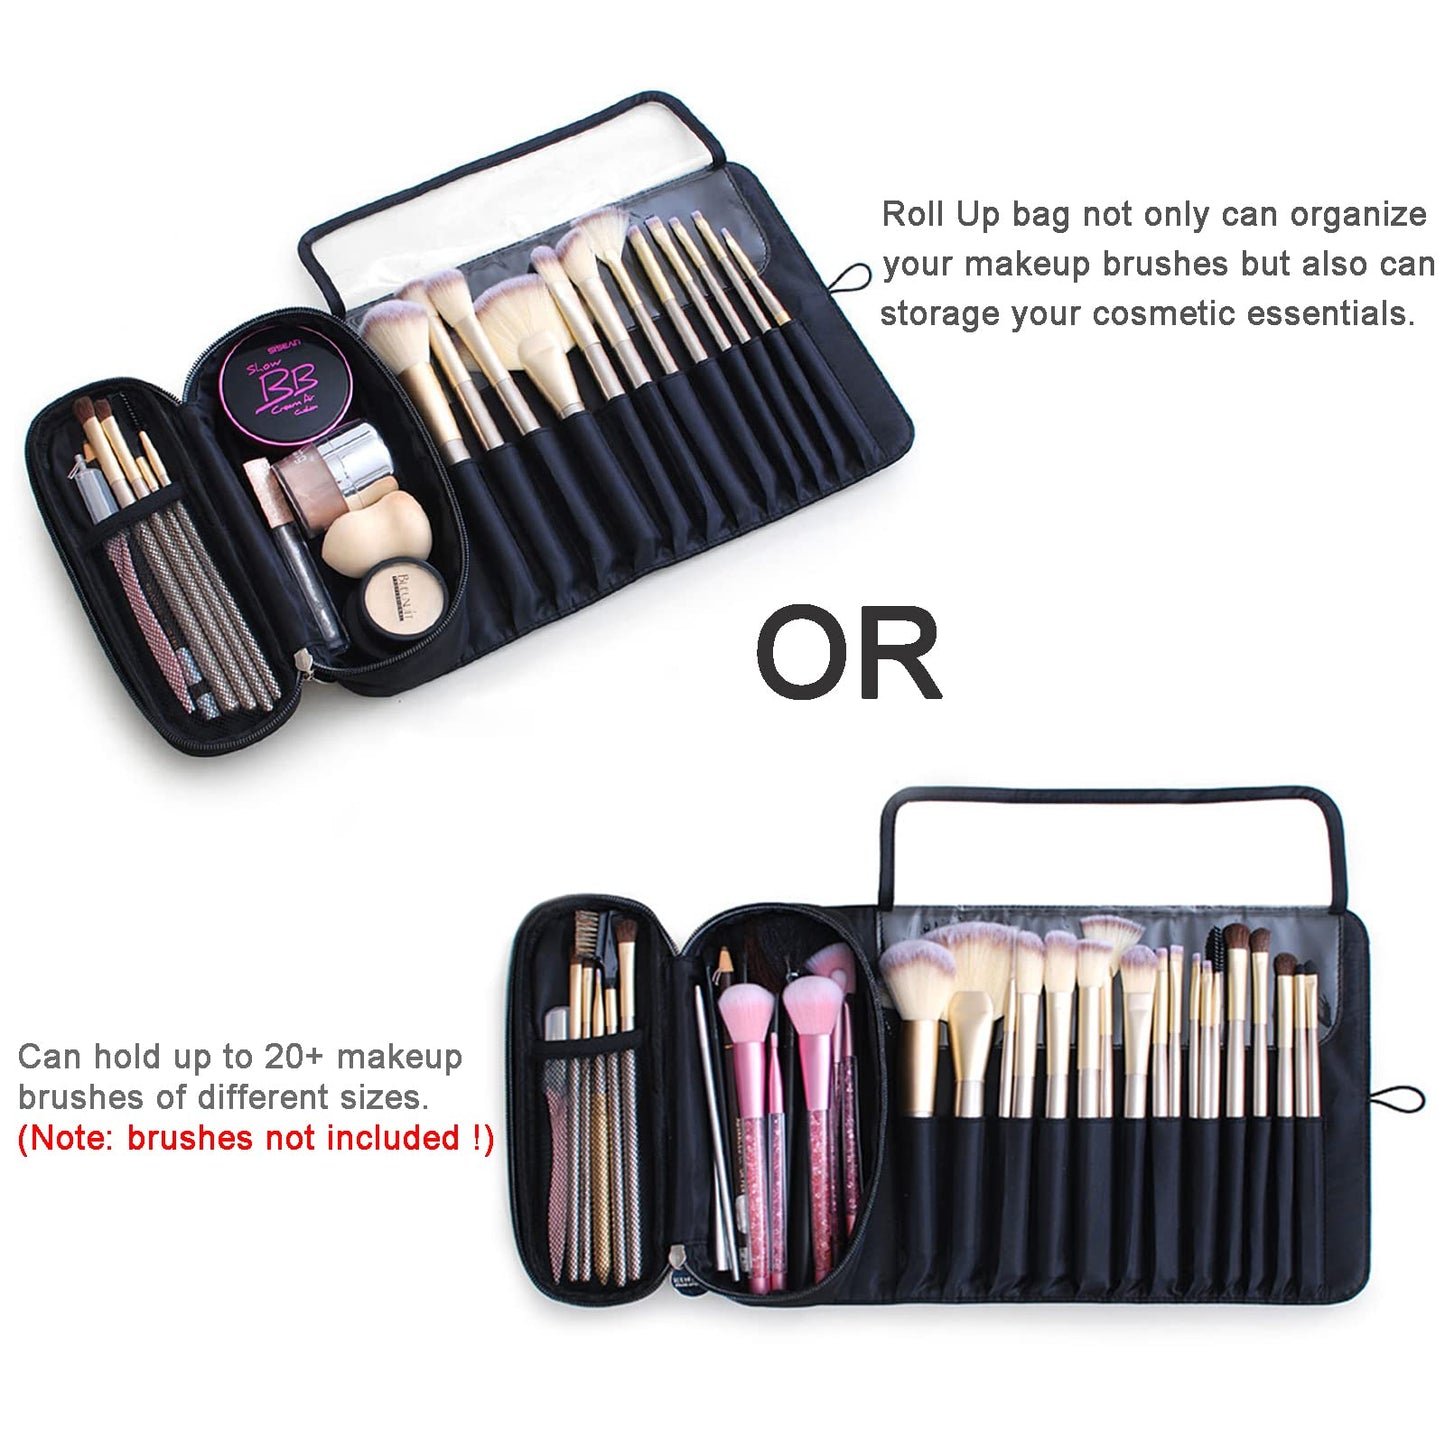 Portable Makeup Brush Organizer Makeup Brush Bag for Travel Can Hold 20+ Brushes Cosmetic Bag Makeup Brush Roll Up Case Pounch Holder for Woman With Bonus Brush Cleaning Mat and Makeup Sponge